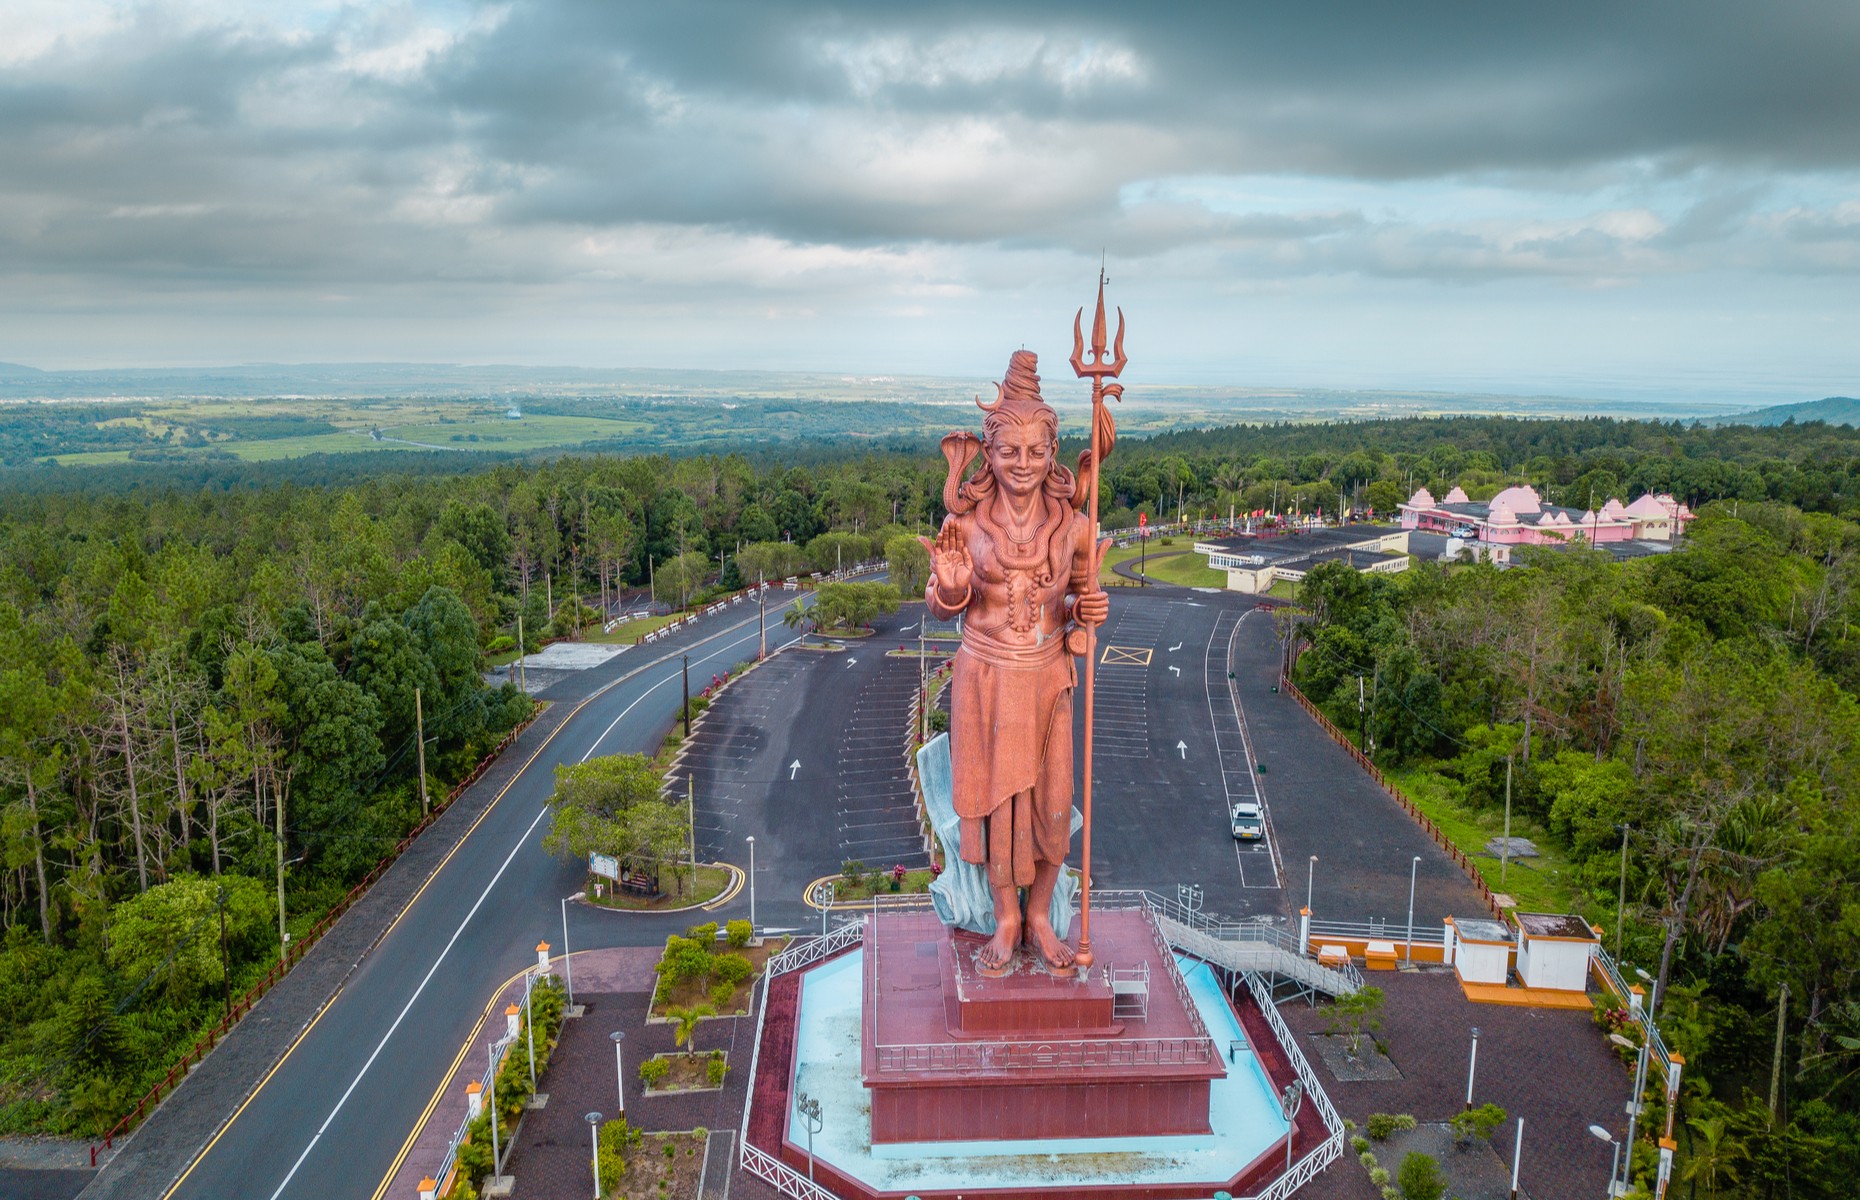 The huge Shiva statue at Grand Bassin, Mauritius. Image: Shutterstock/TB Photography